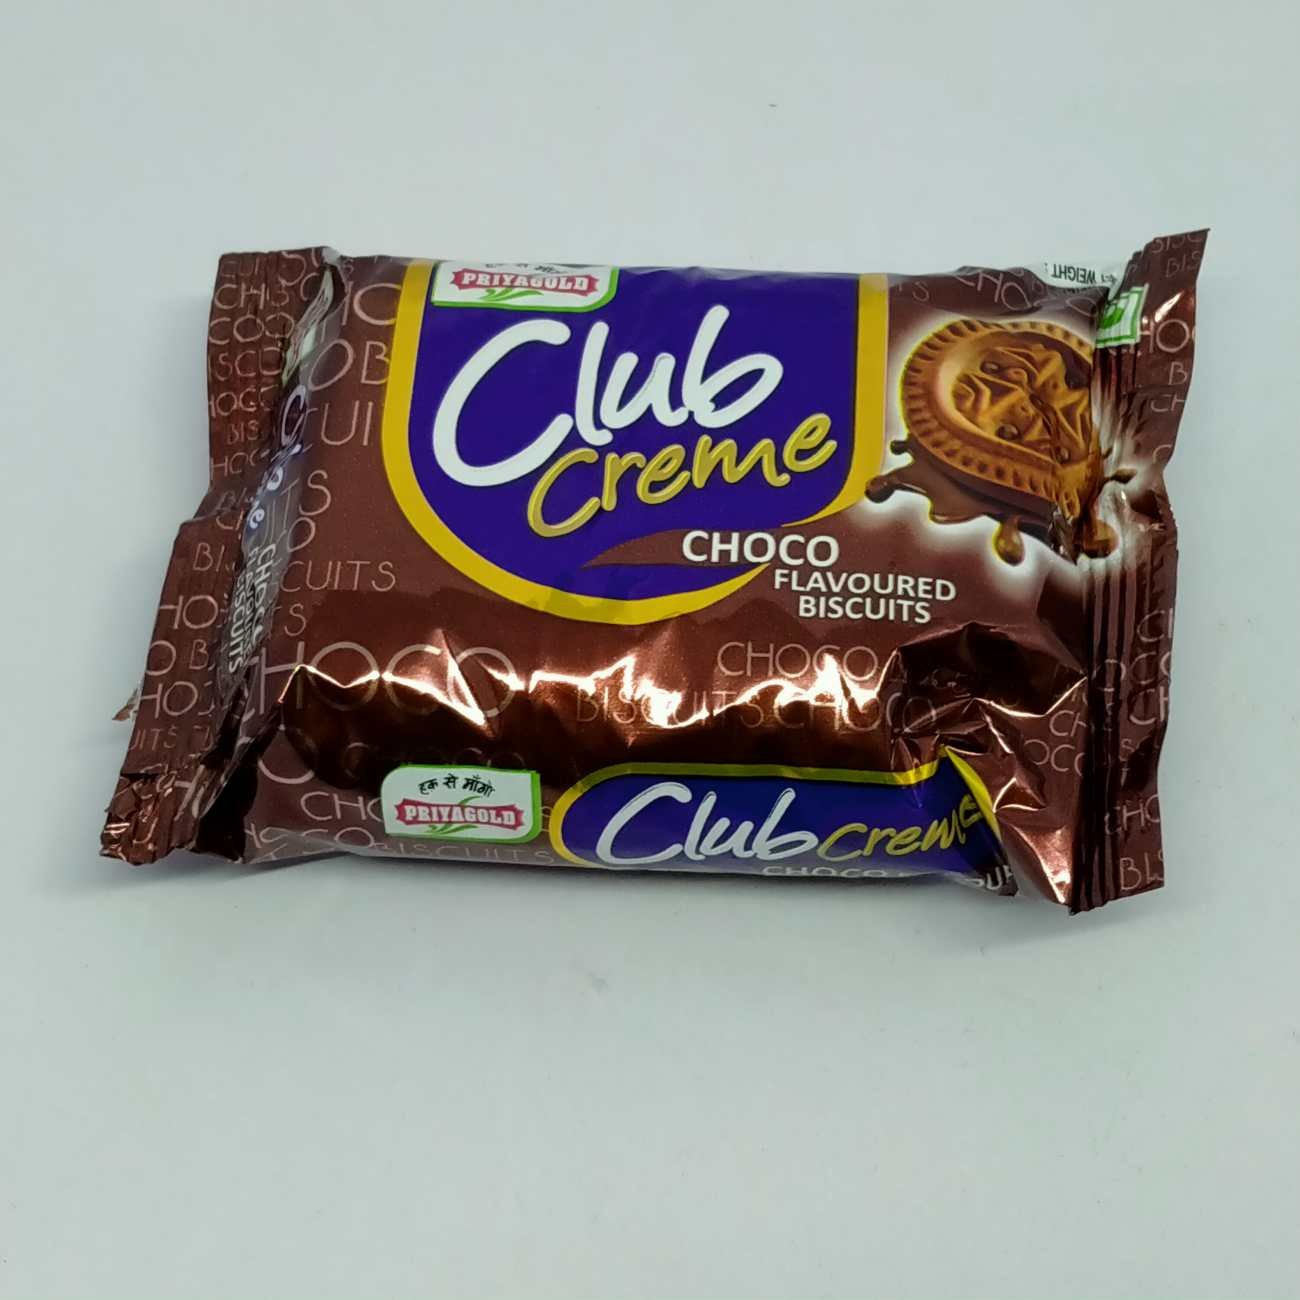 Priyagold Club cream choco flavour biscuit, 86 grams